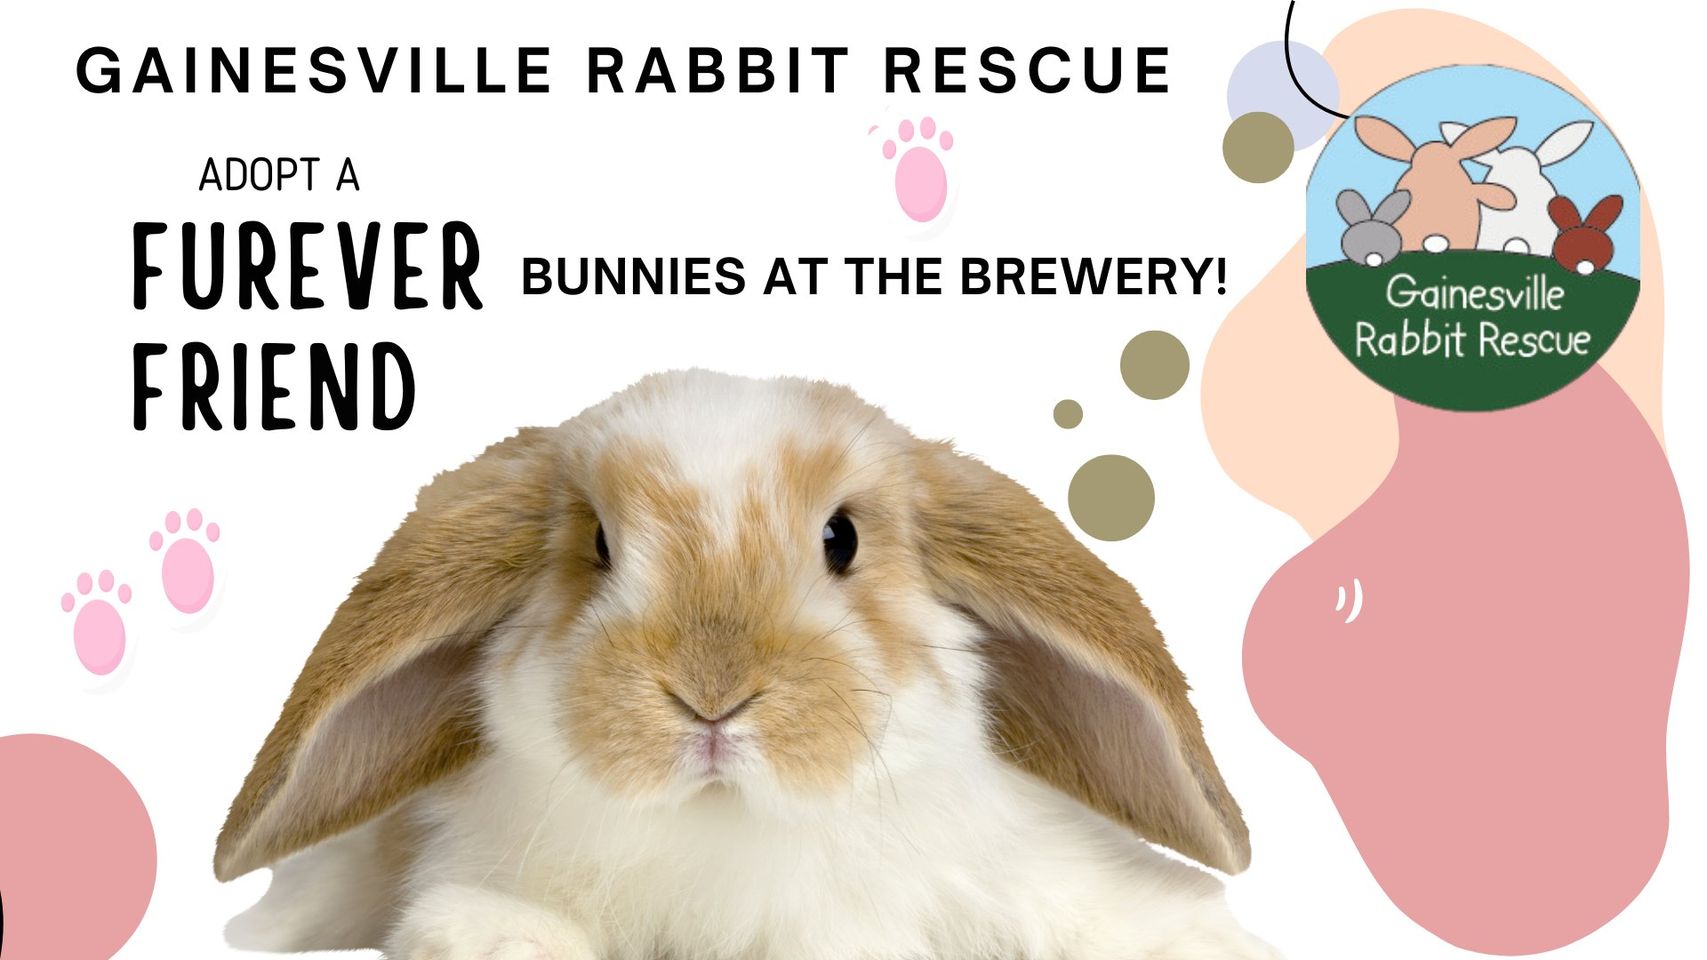 bunnies at the brewery